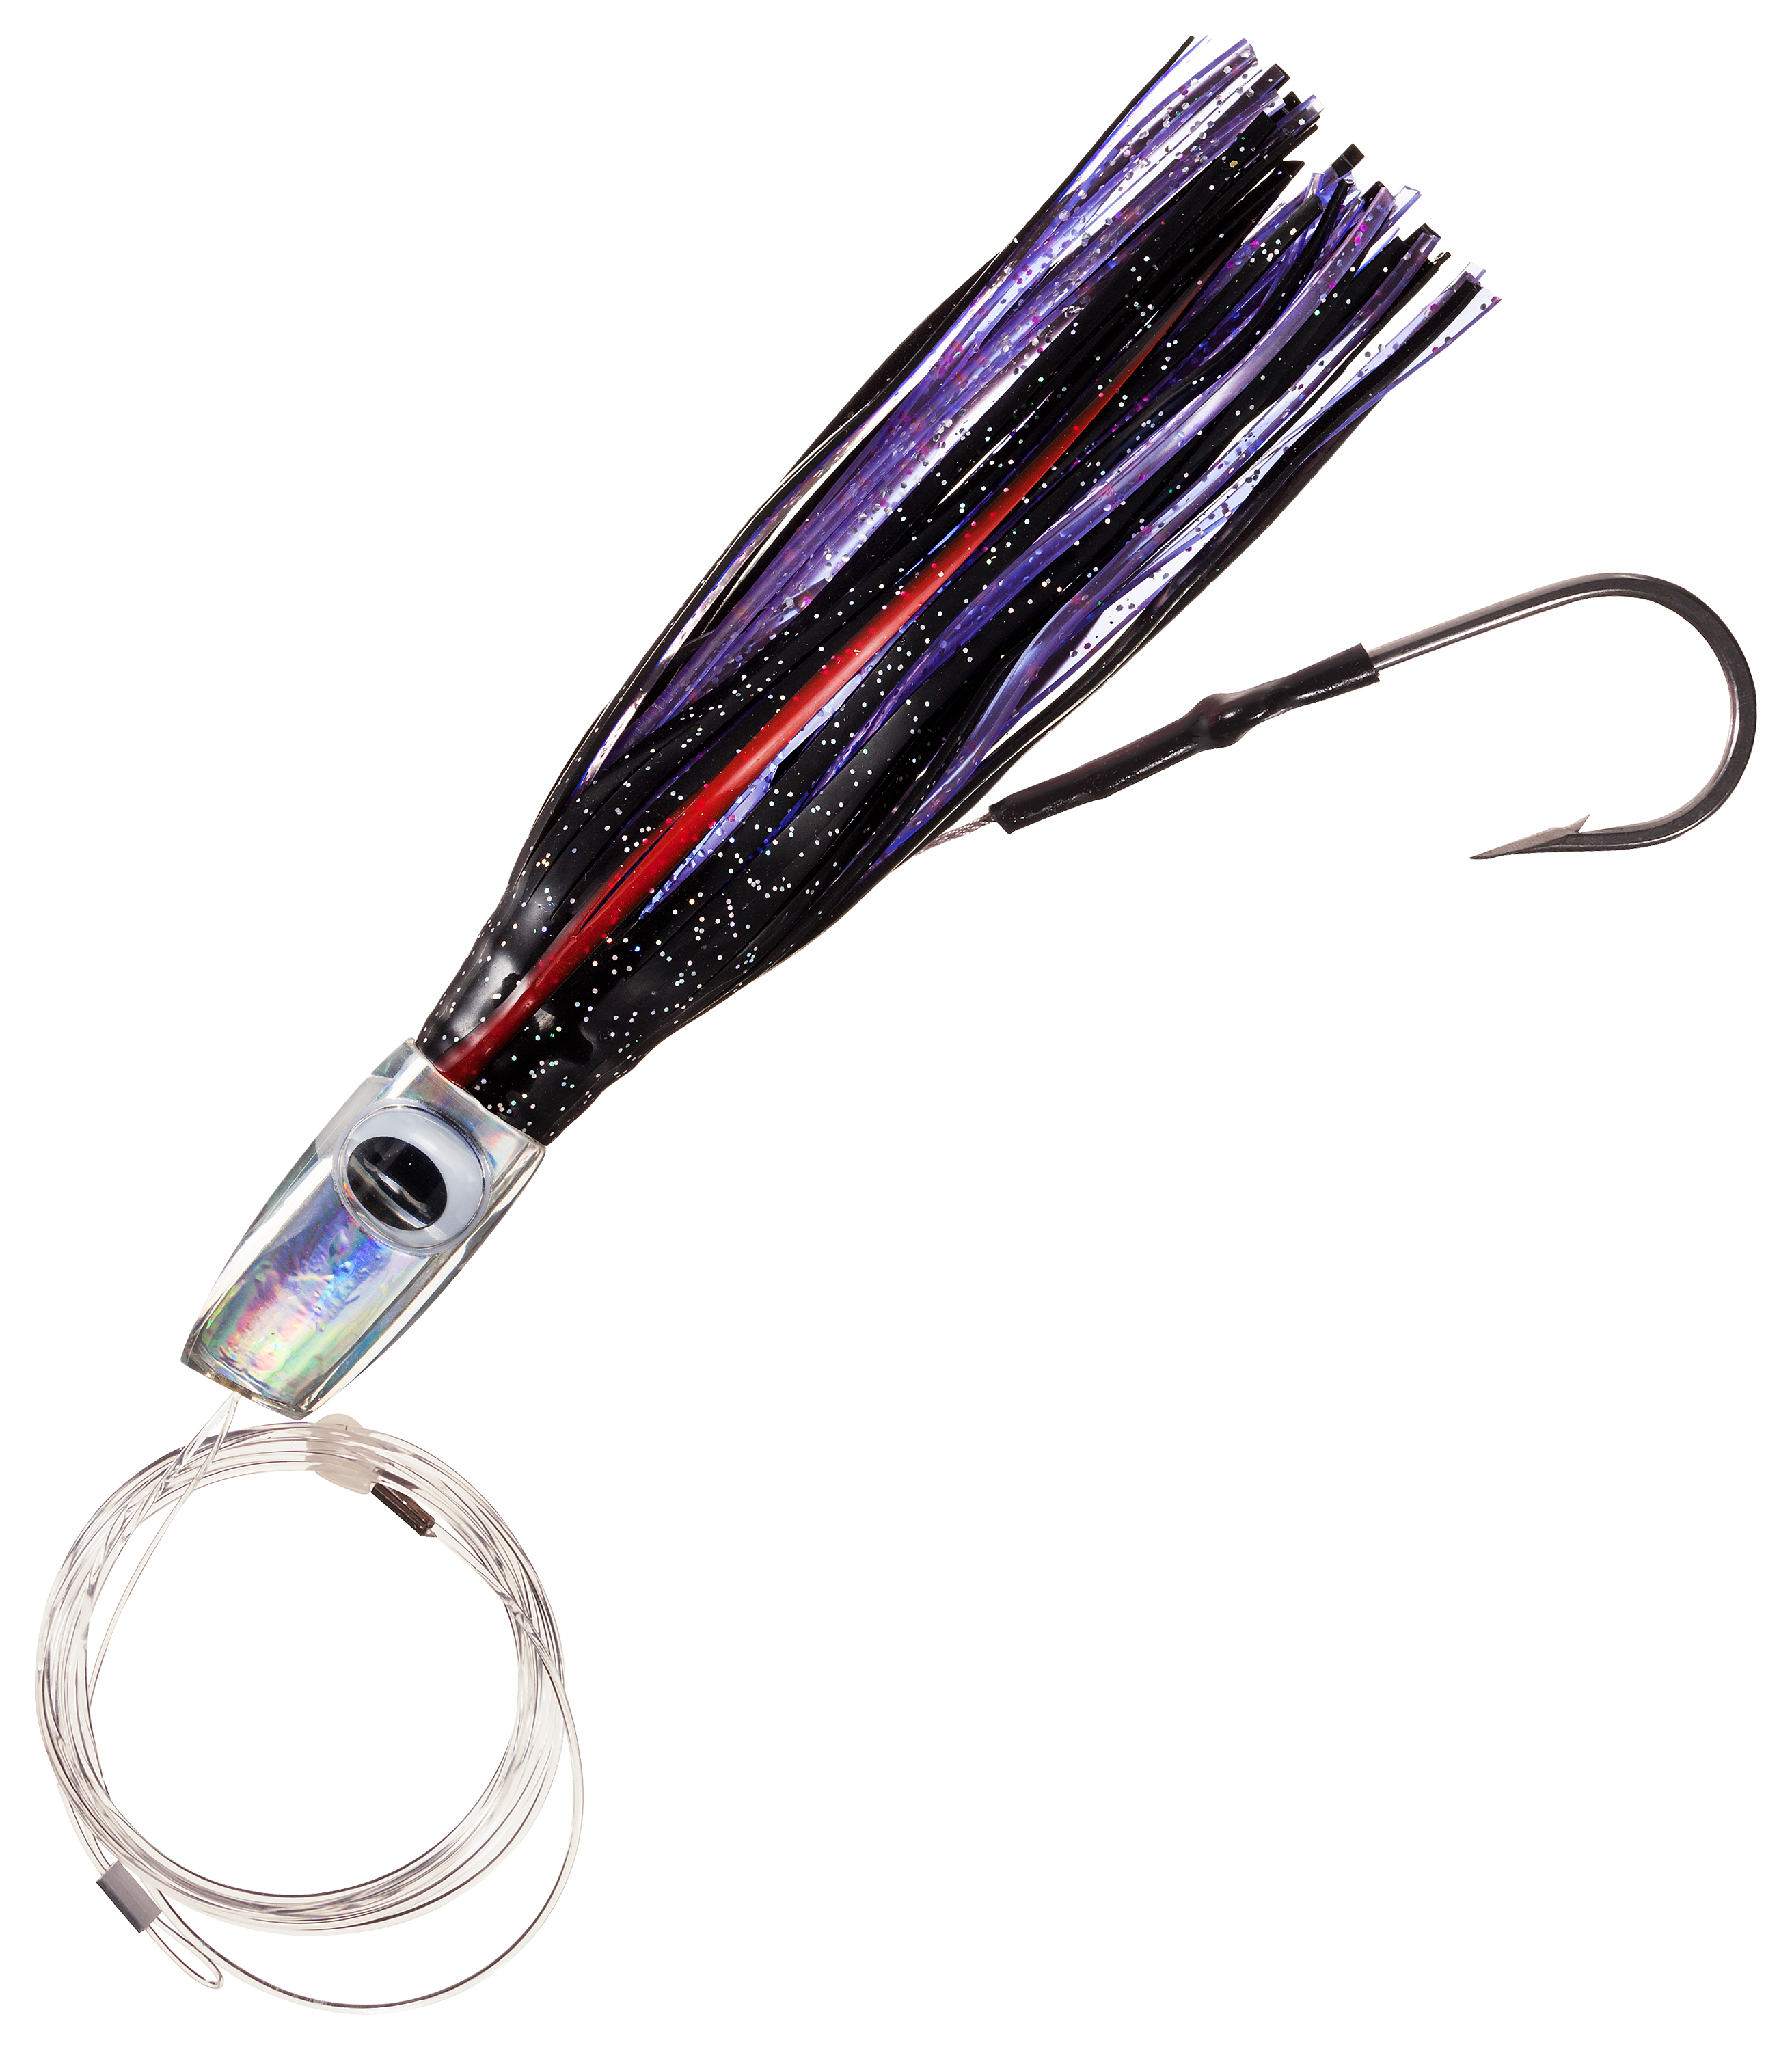 Offshore Angler Rigged Tapered Slant Trolling Lure